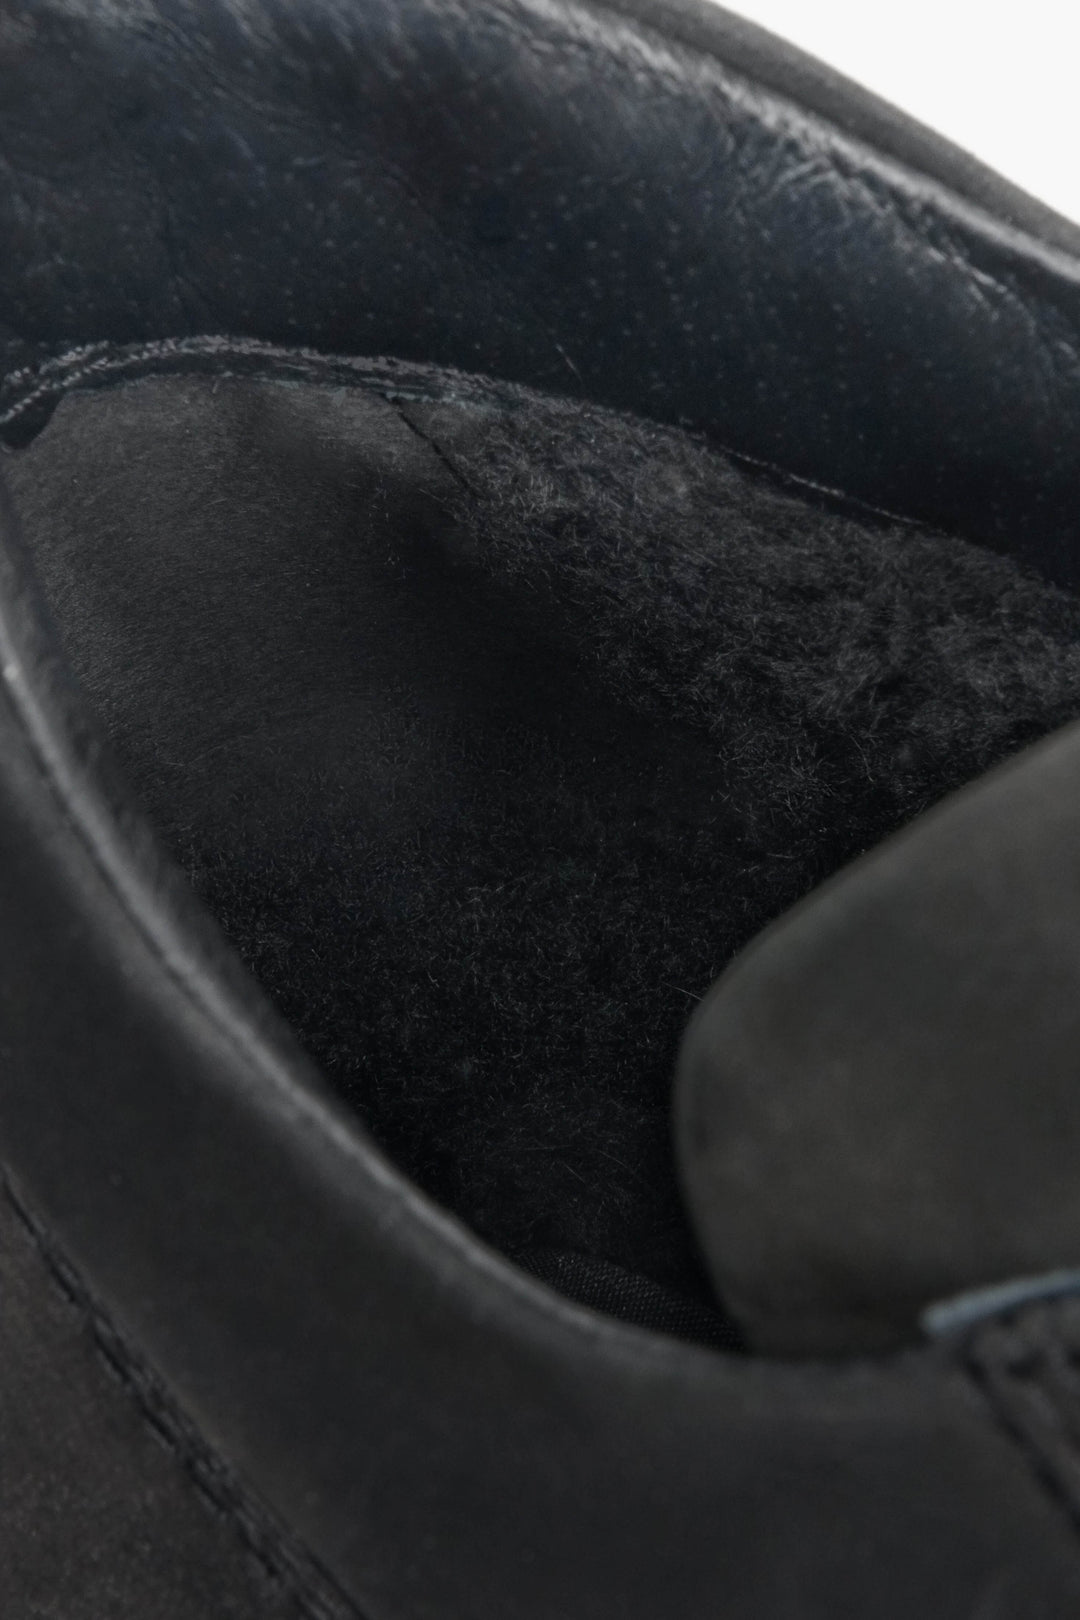 Men's black insulated shoes - close-up of the lining.